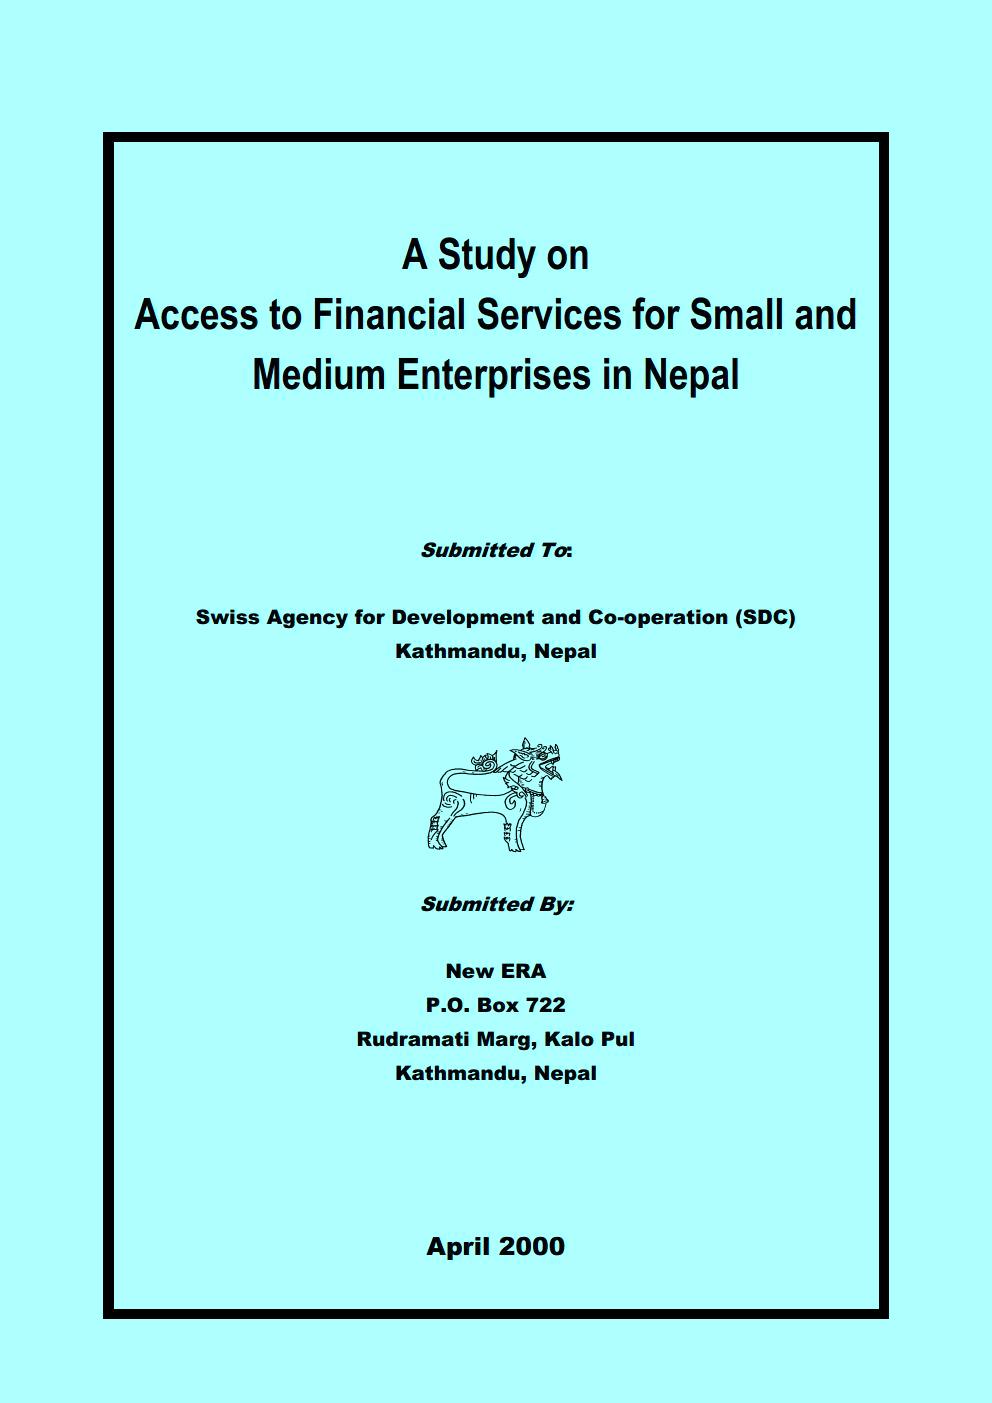 A Study on Access to Financial Services for Small and Medium Enterprises in Nepal